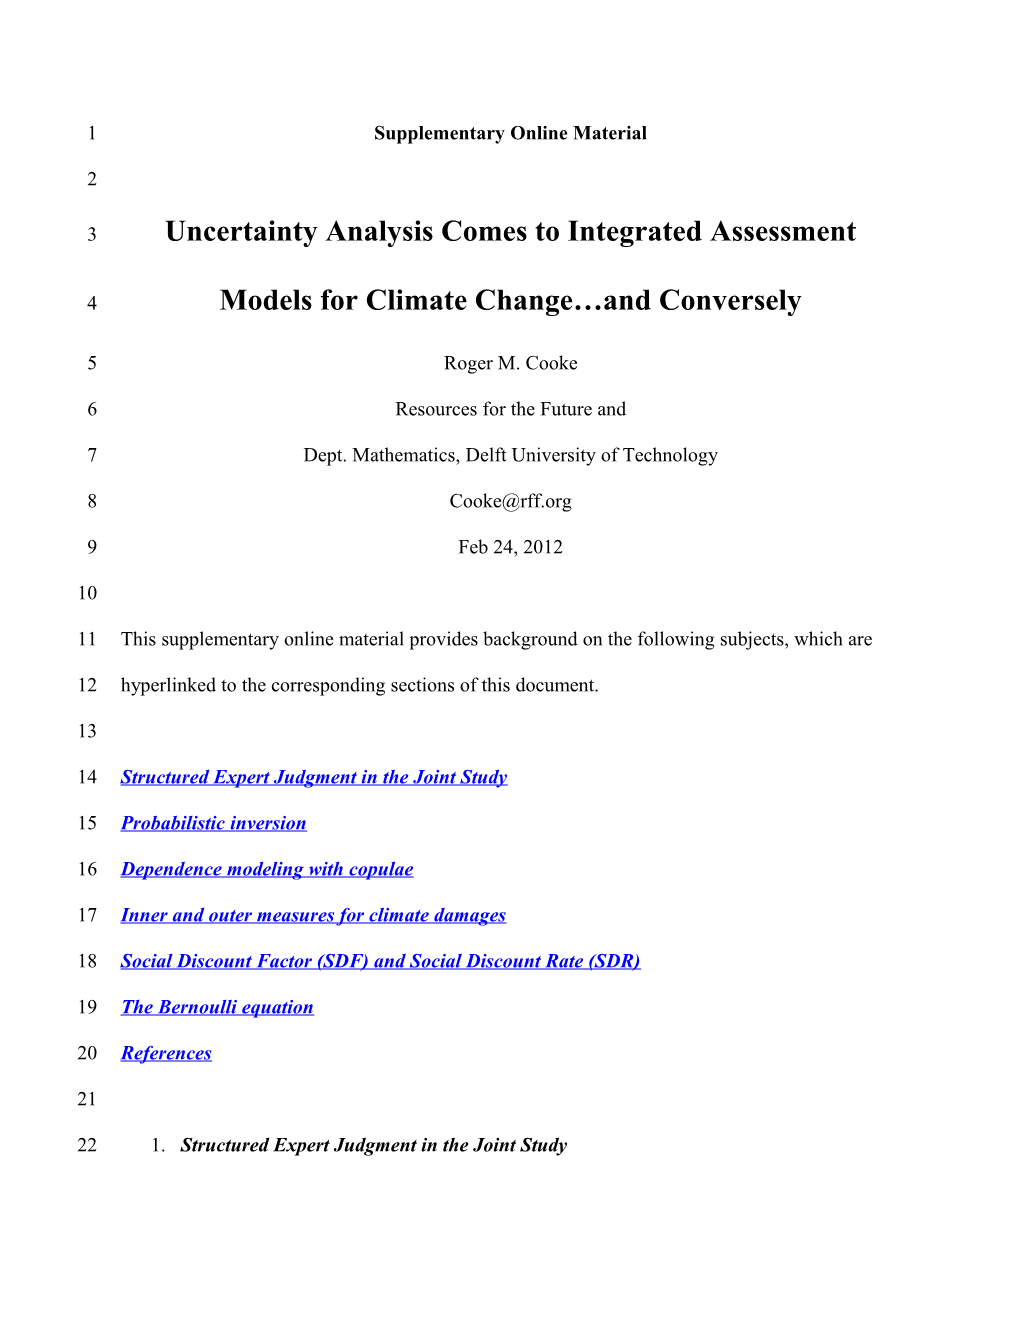 Uncertainty Analysis Comes to Integrated Assessment Models for Climate Change and Conversely